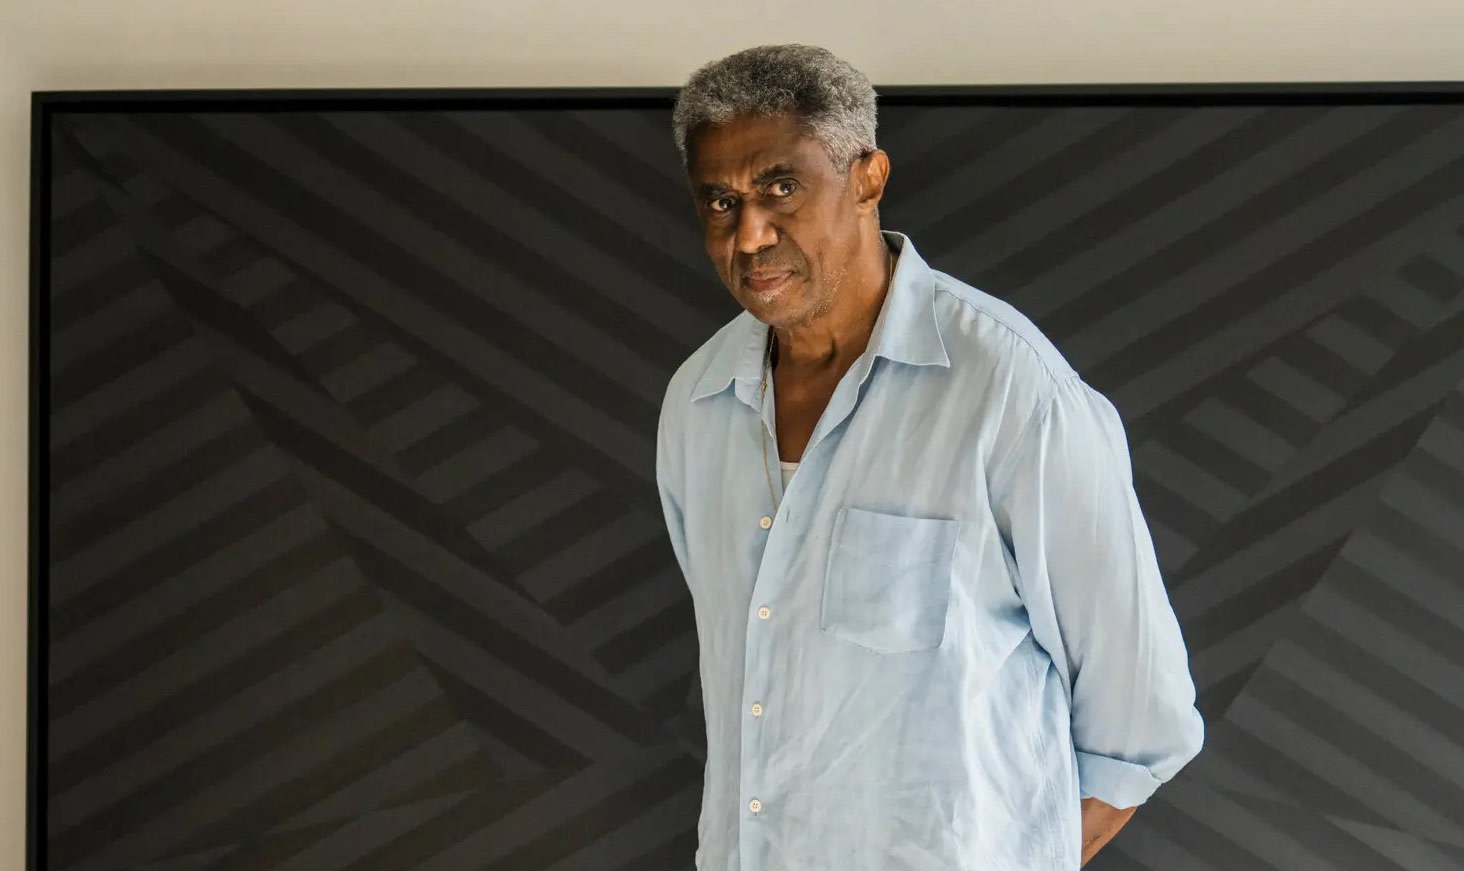 James Little: Unapologetic Abstractionist Painter, Catches The Limelight: The New York Times